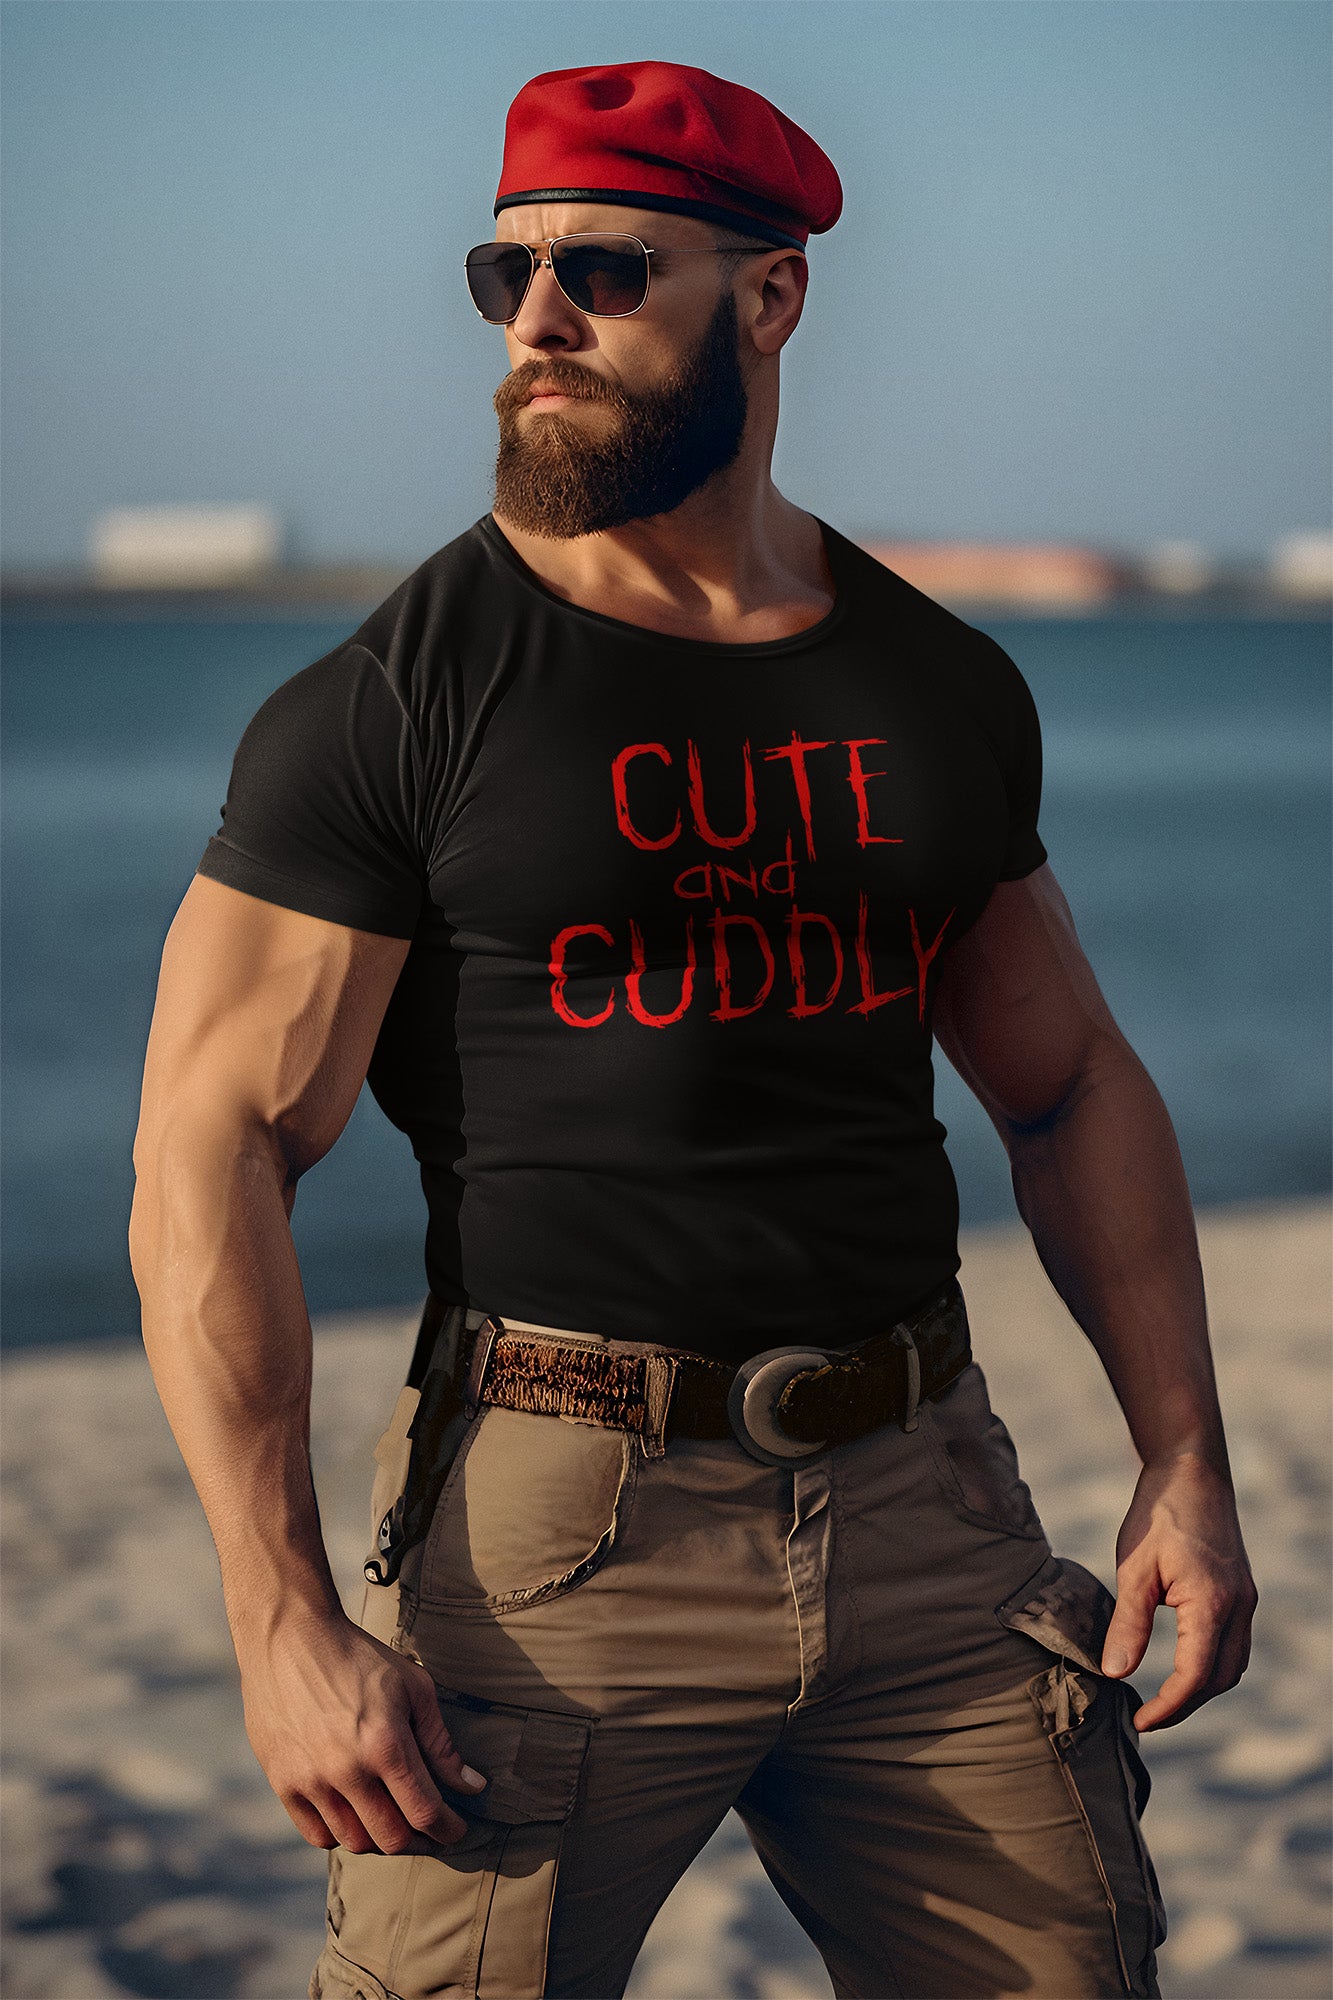 Cute and Cuddly Ironic T-Shirt